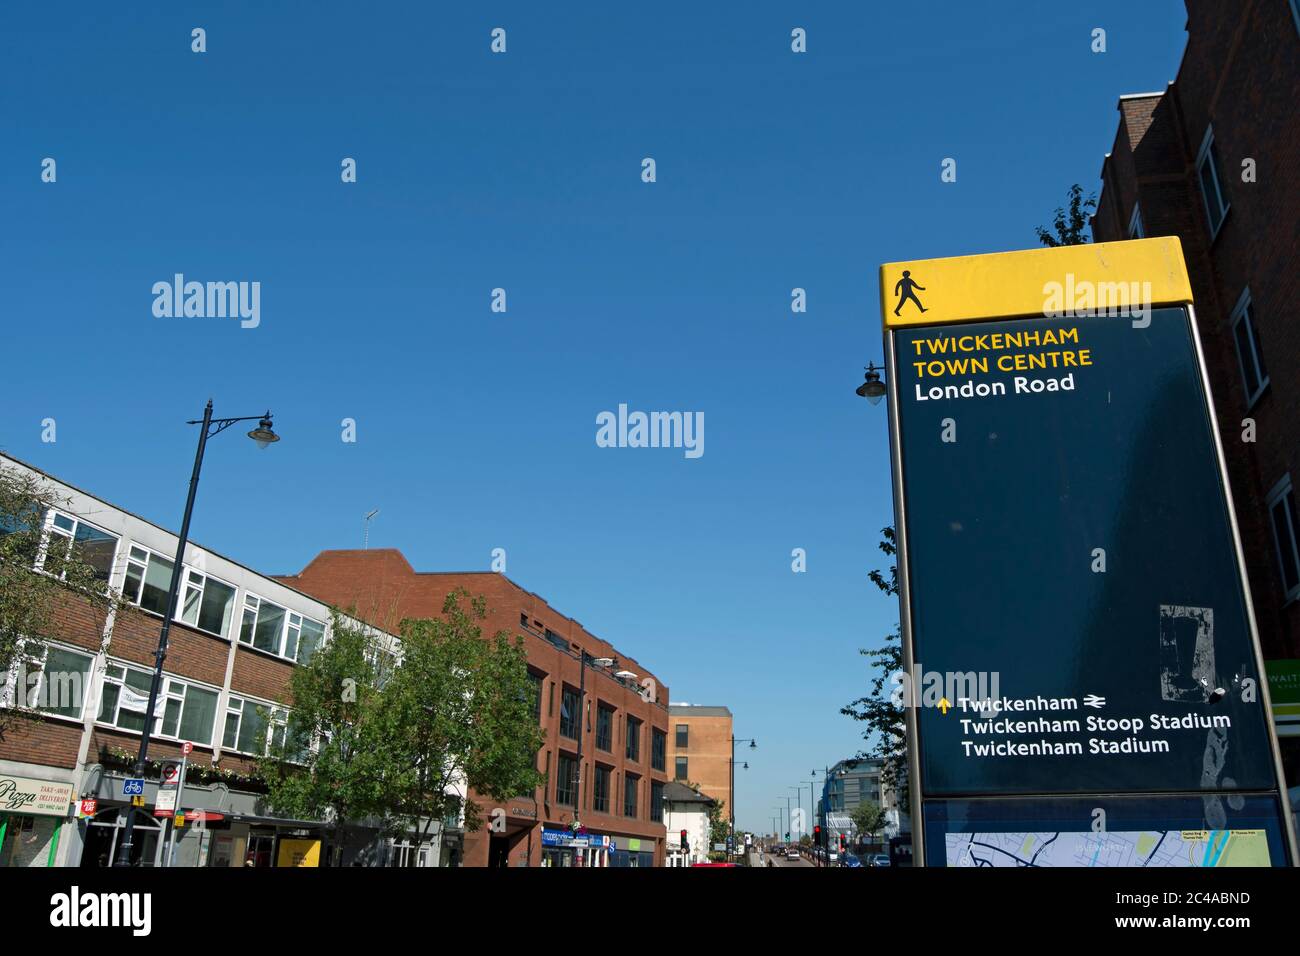 wayfinding sign in twickenham, middlesex, england, showing directions to local points of interest including twickenham stoop, stadium and station Stock Photo